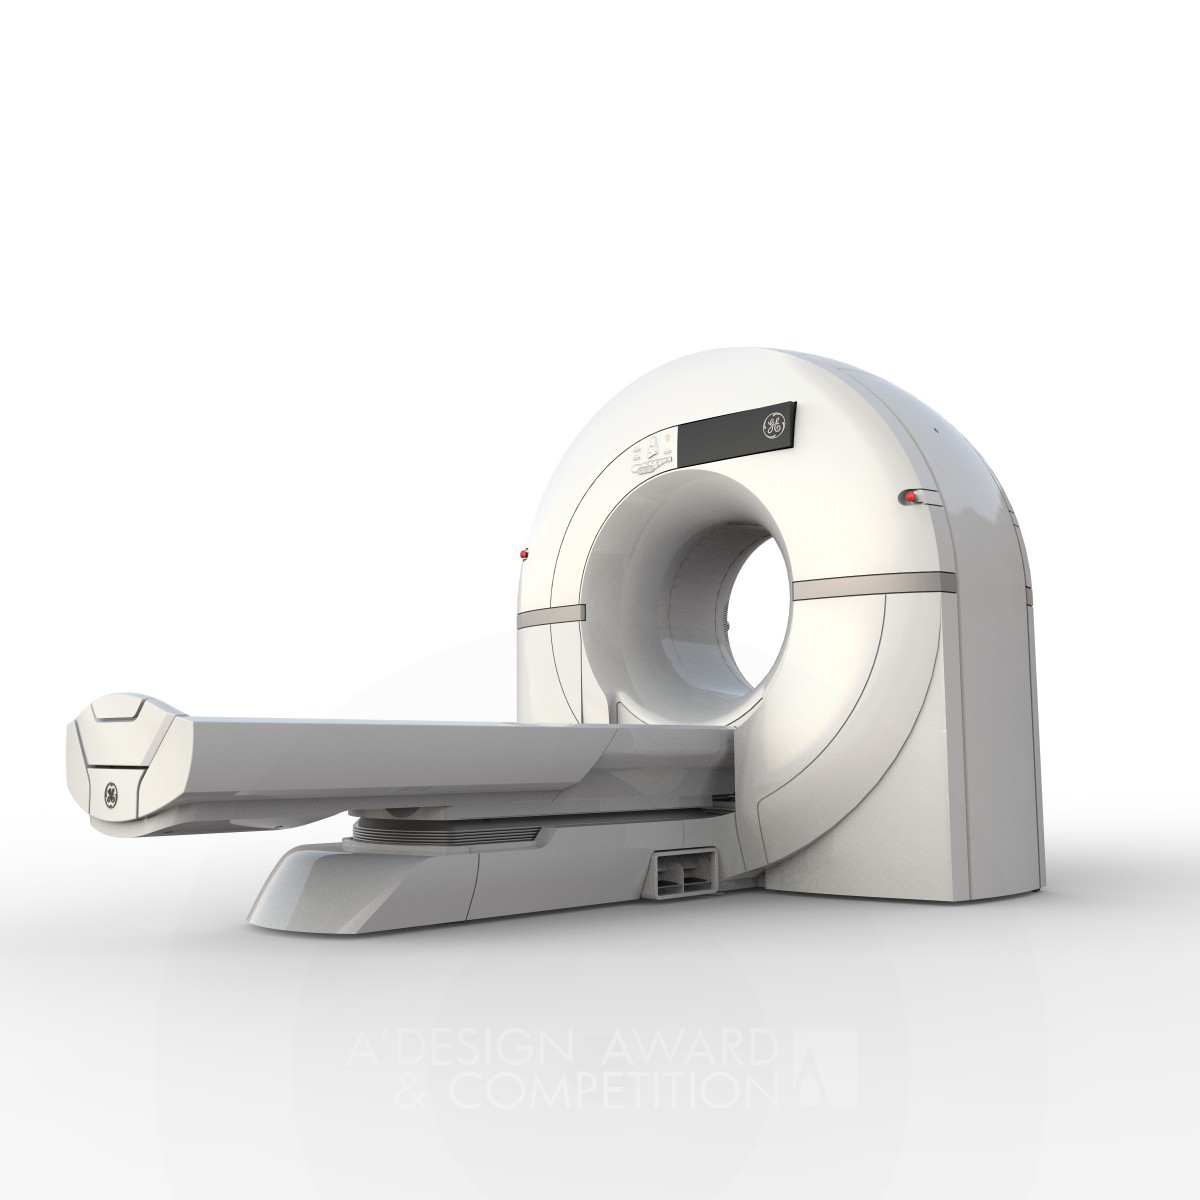 CardioGraphe Ct Scanner by Alex Padwa